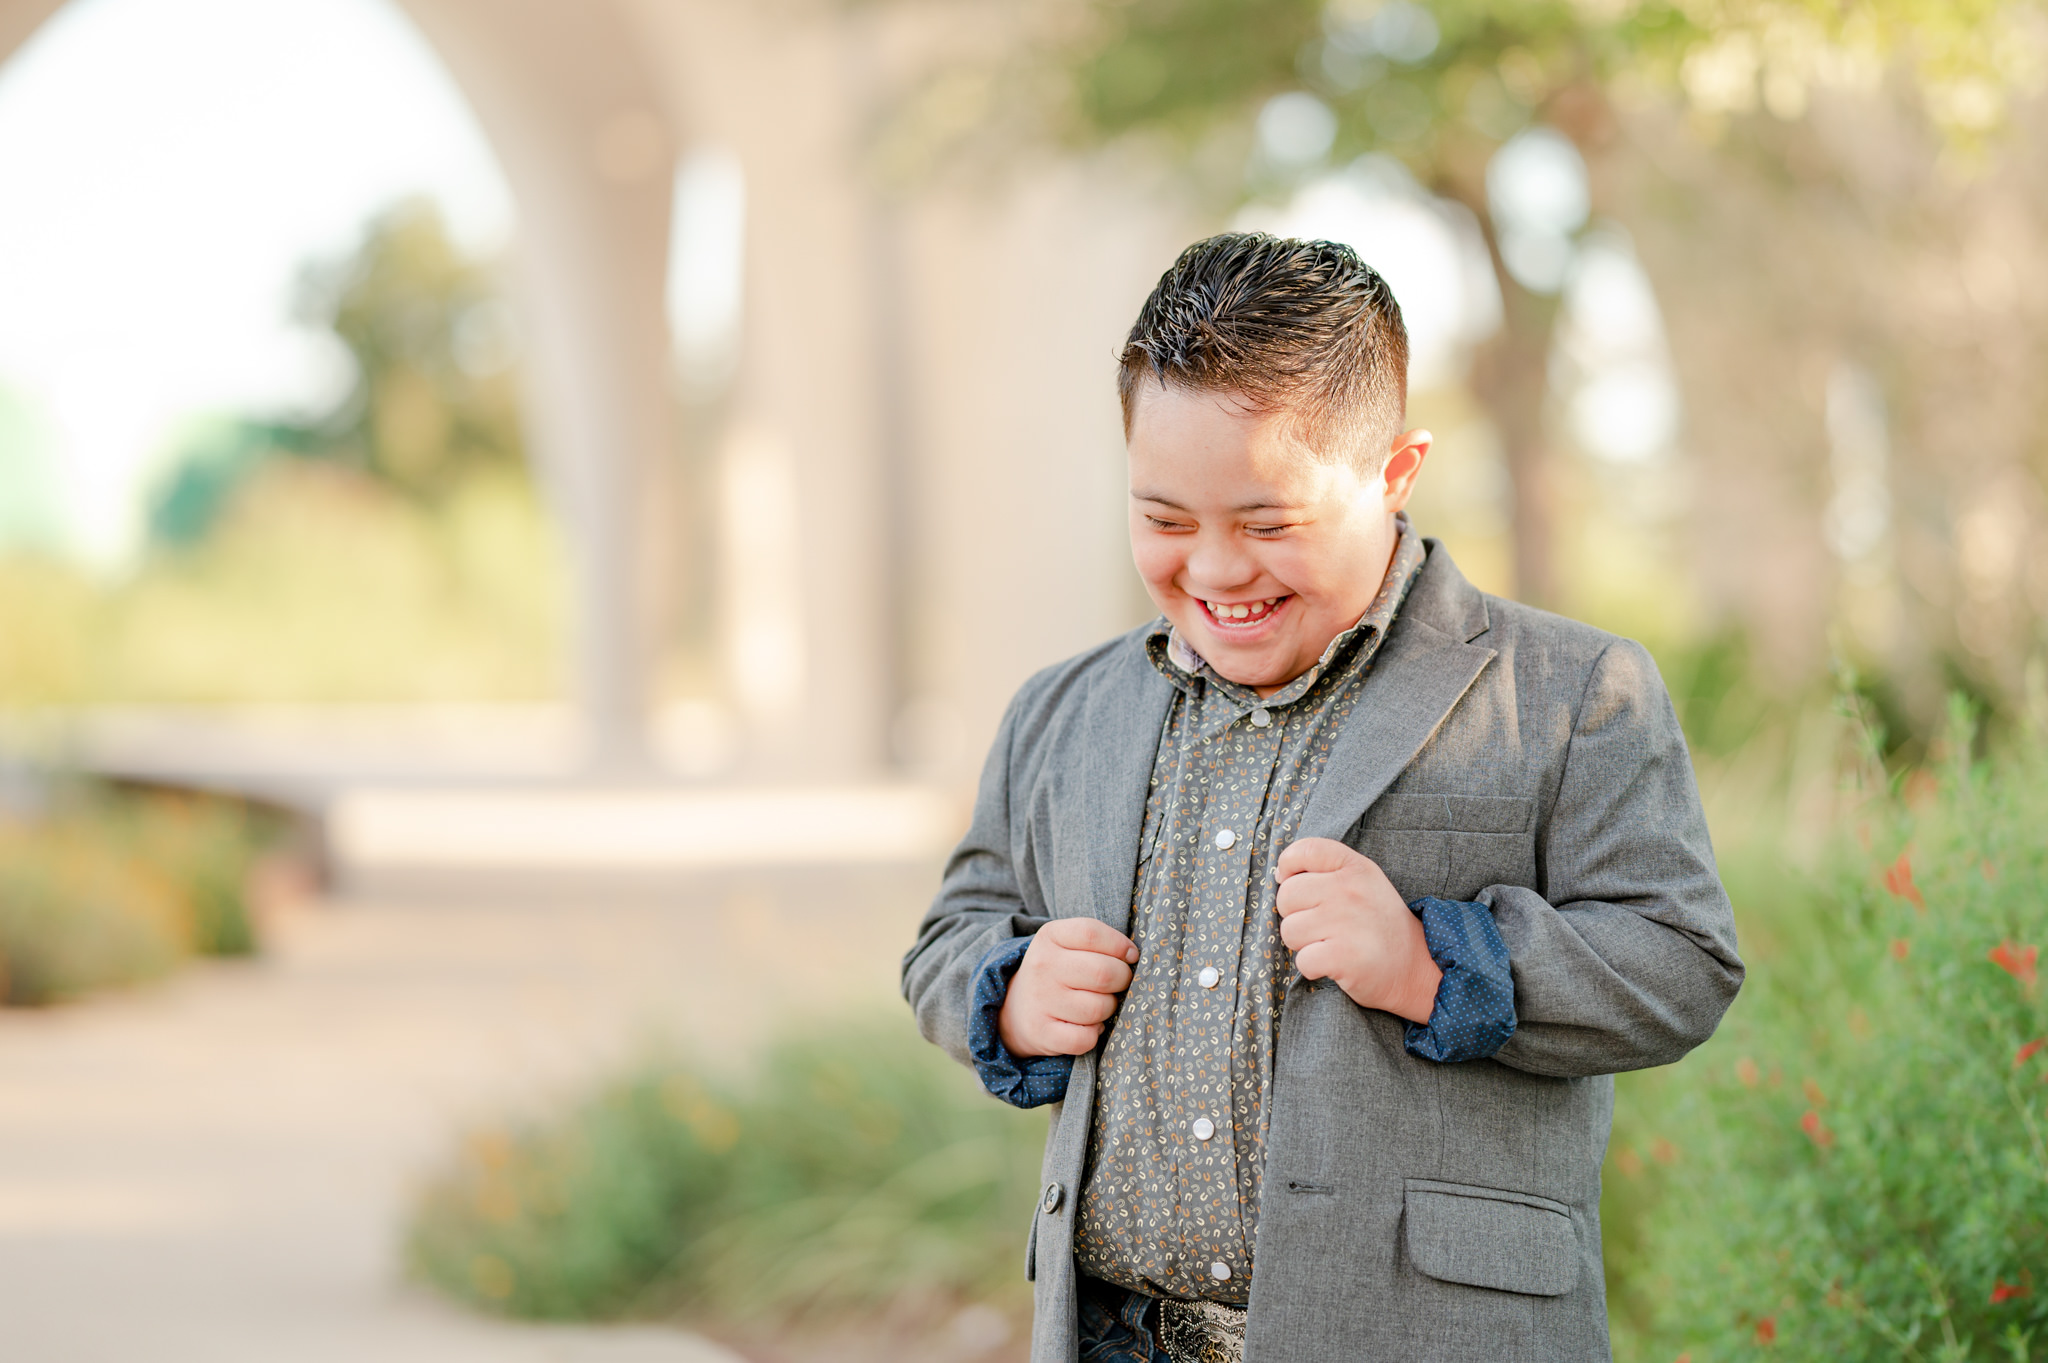 A young boy with Downy syndrome is dressed to the nines and laughing during photos with San Antonio special needs photographer Cassey Golden.